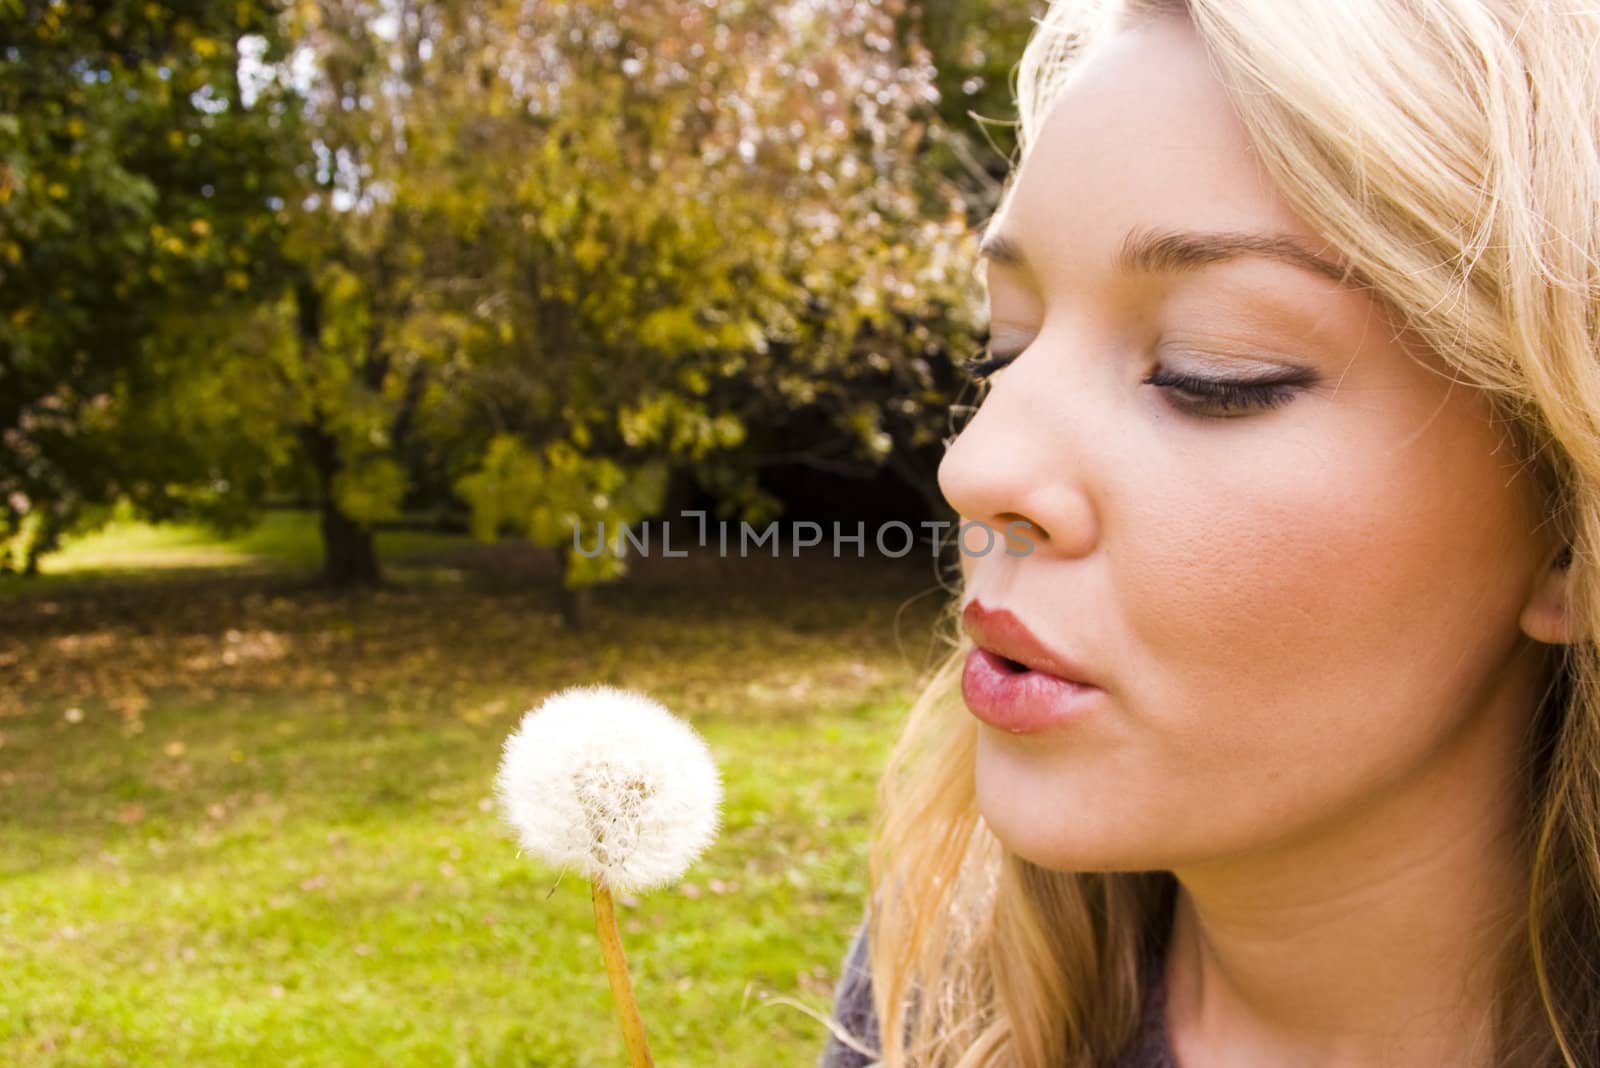 blowing a flower in the park